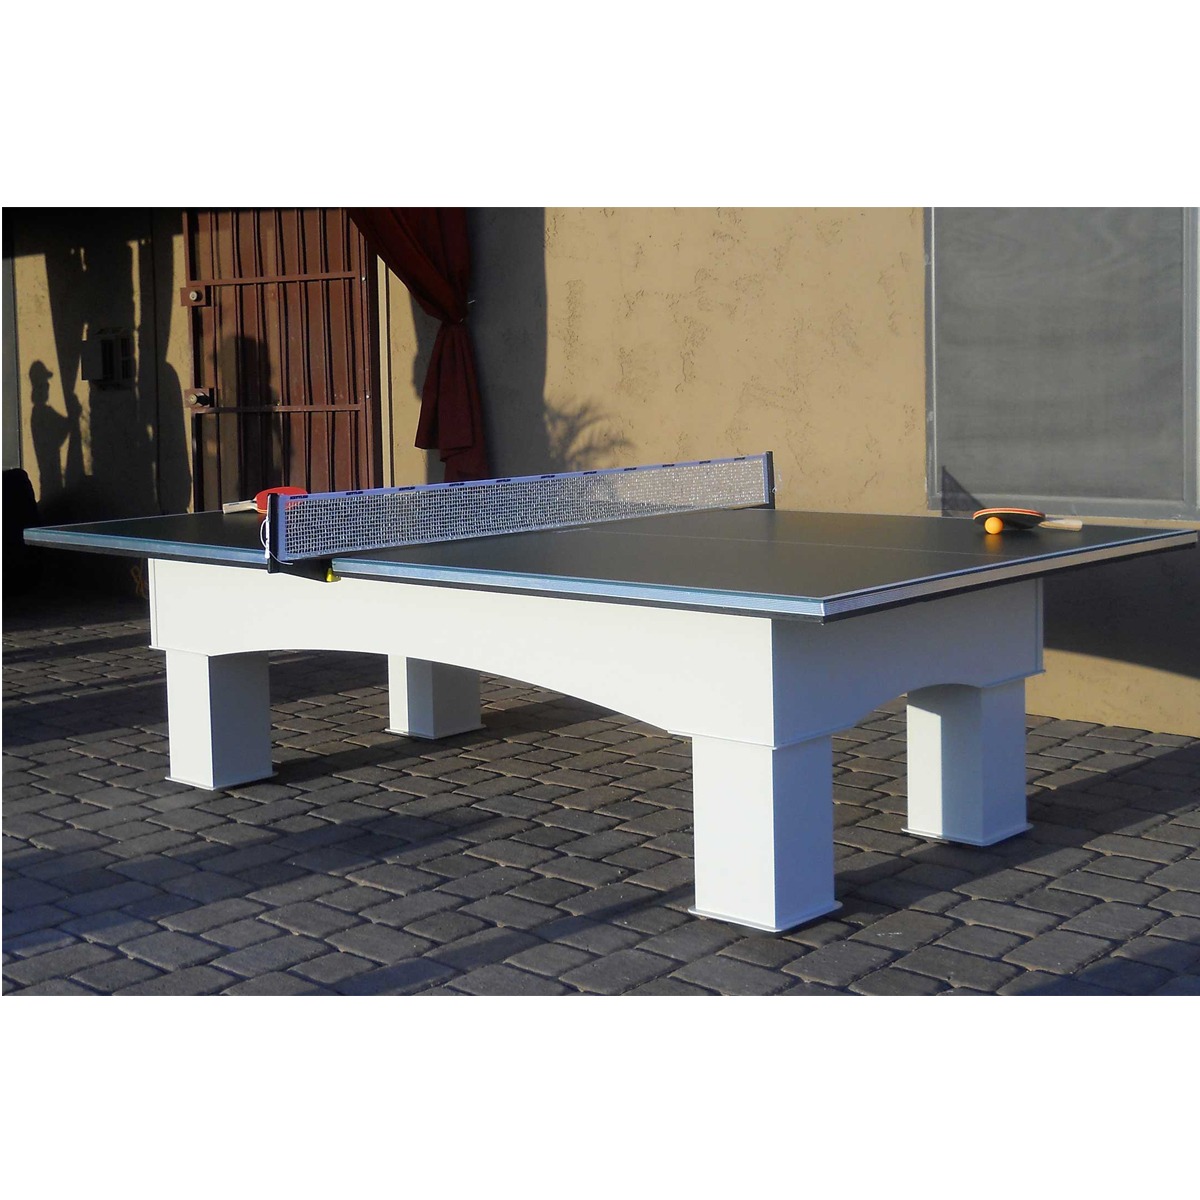 Outdoor-Tennis-Table-by-R-R-1-1.jpg